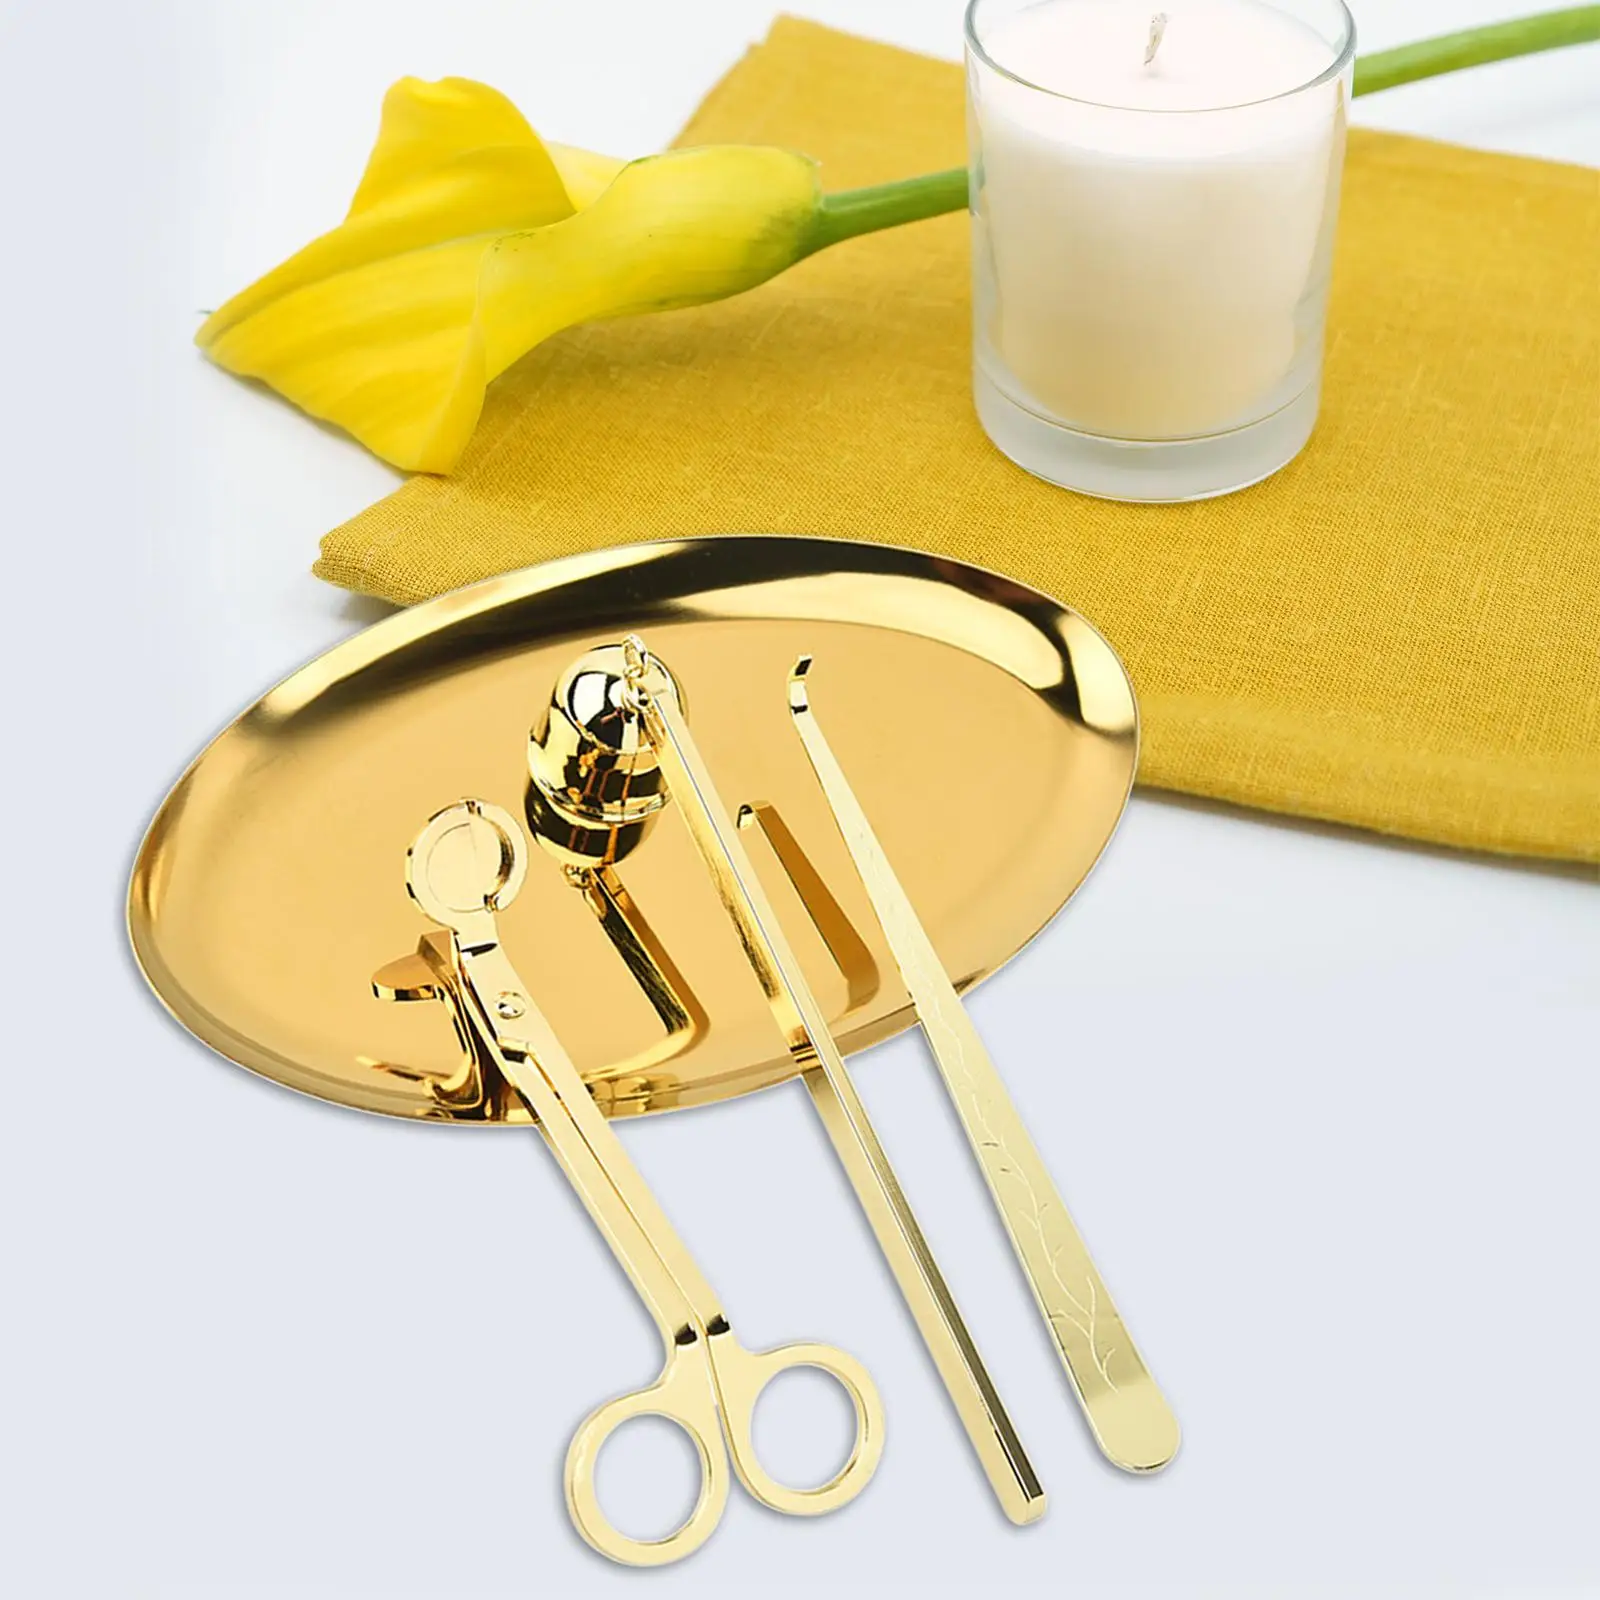 4Pcs Candle Accessories Wick Dipper Cutter Kit with Tray Plate Candle Care Tool for Thanksgiving Christmas Rustproof Versatile